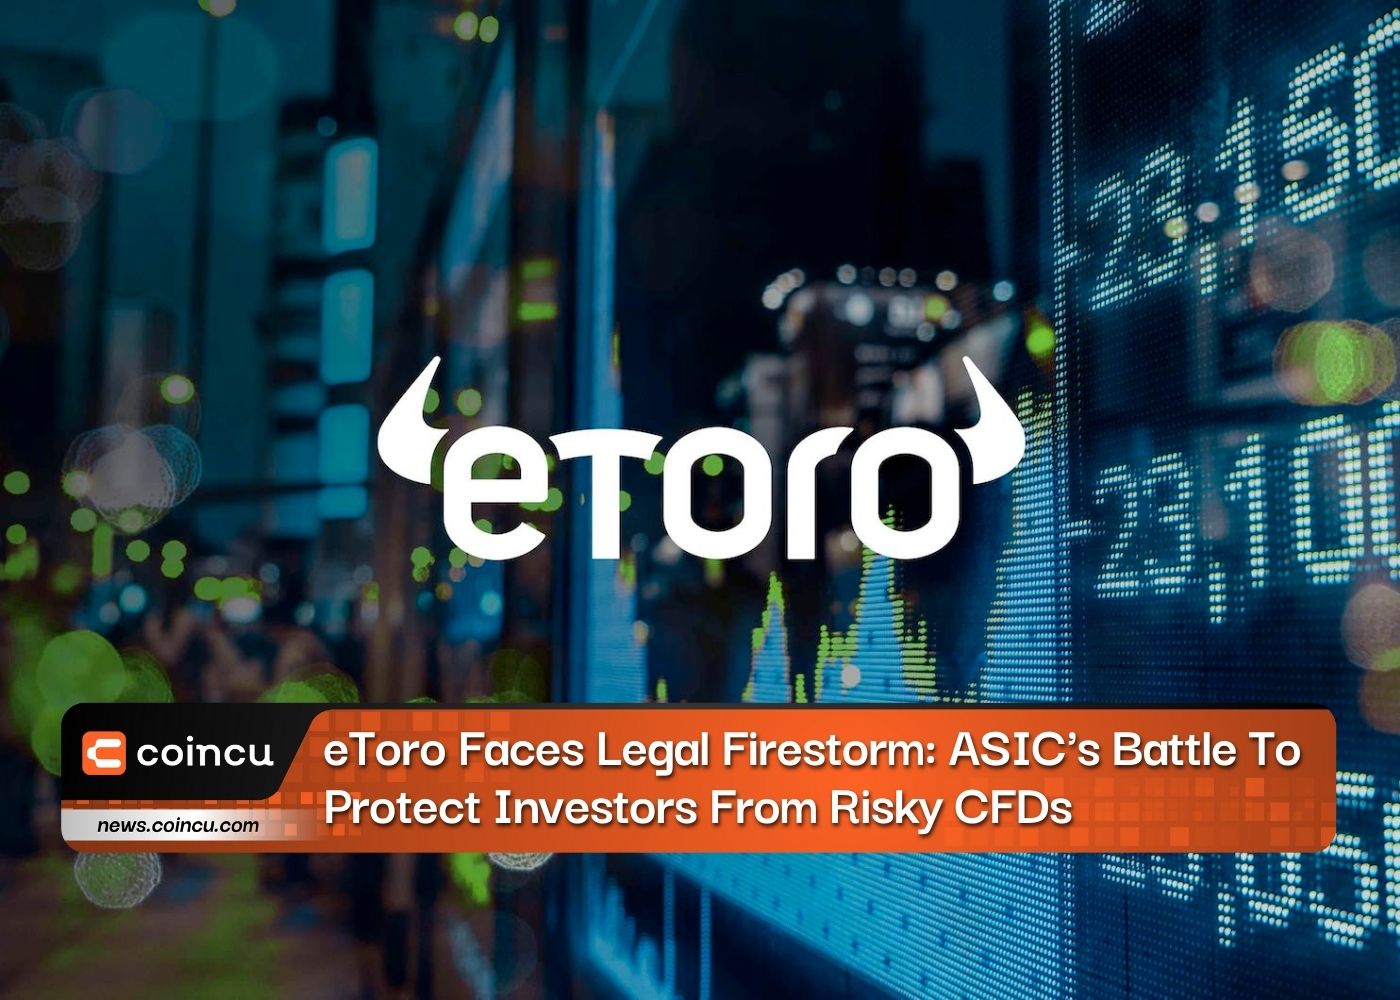 eToro Faces Legal Firestorm: ASIC's Battle To Protect Investors From Risky CFDs